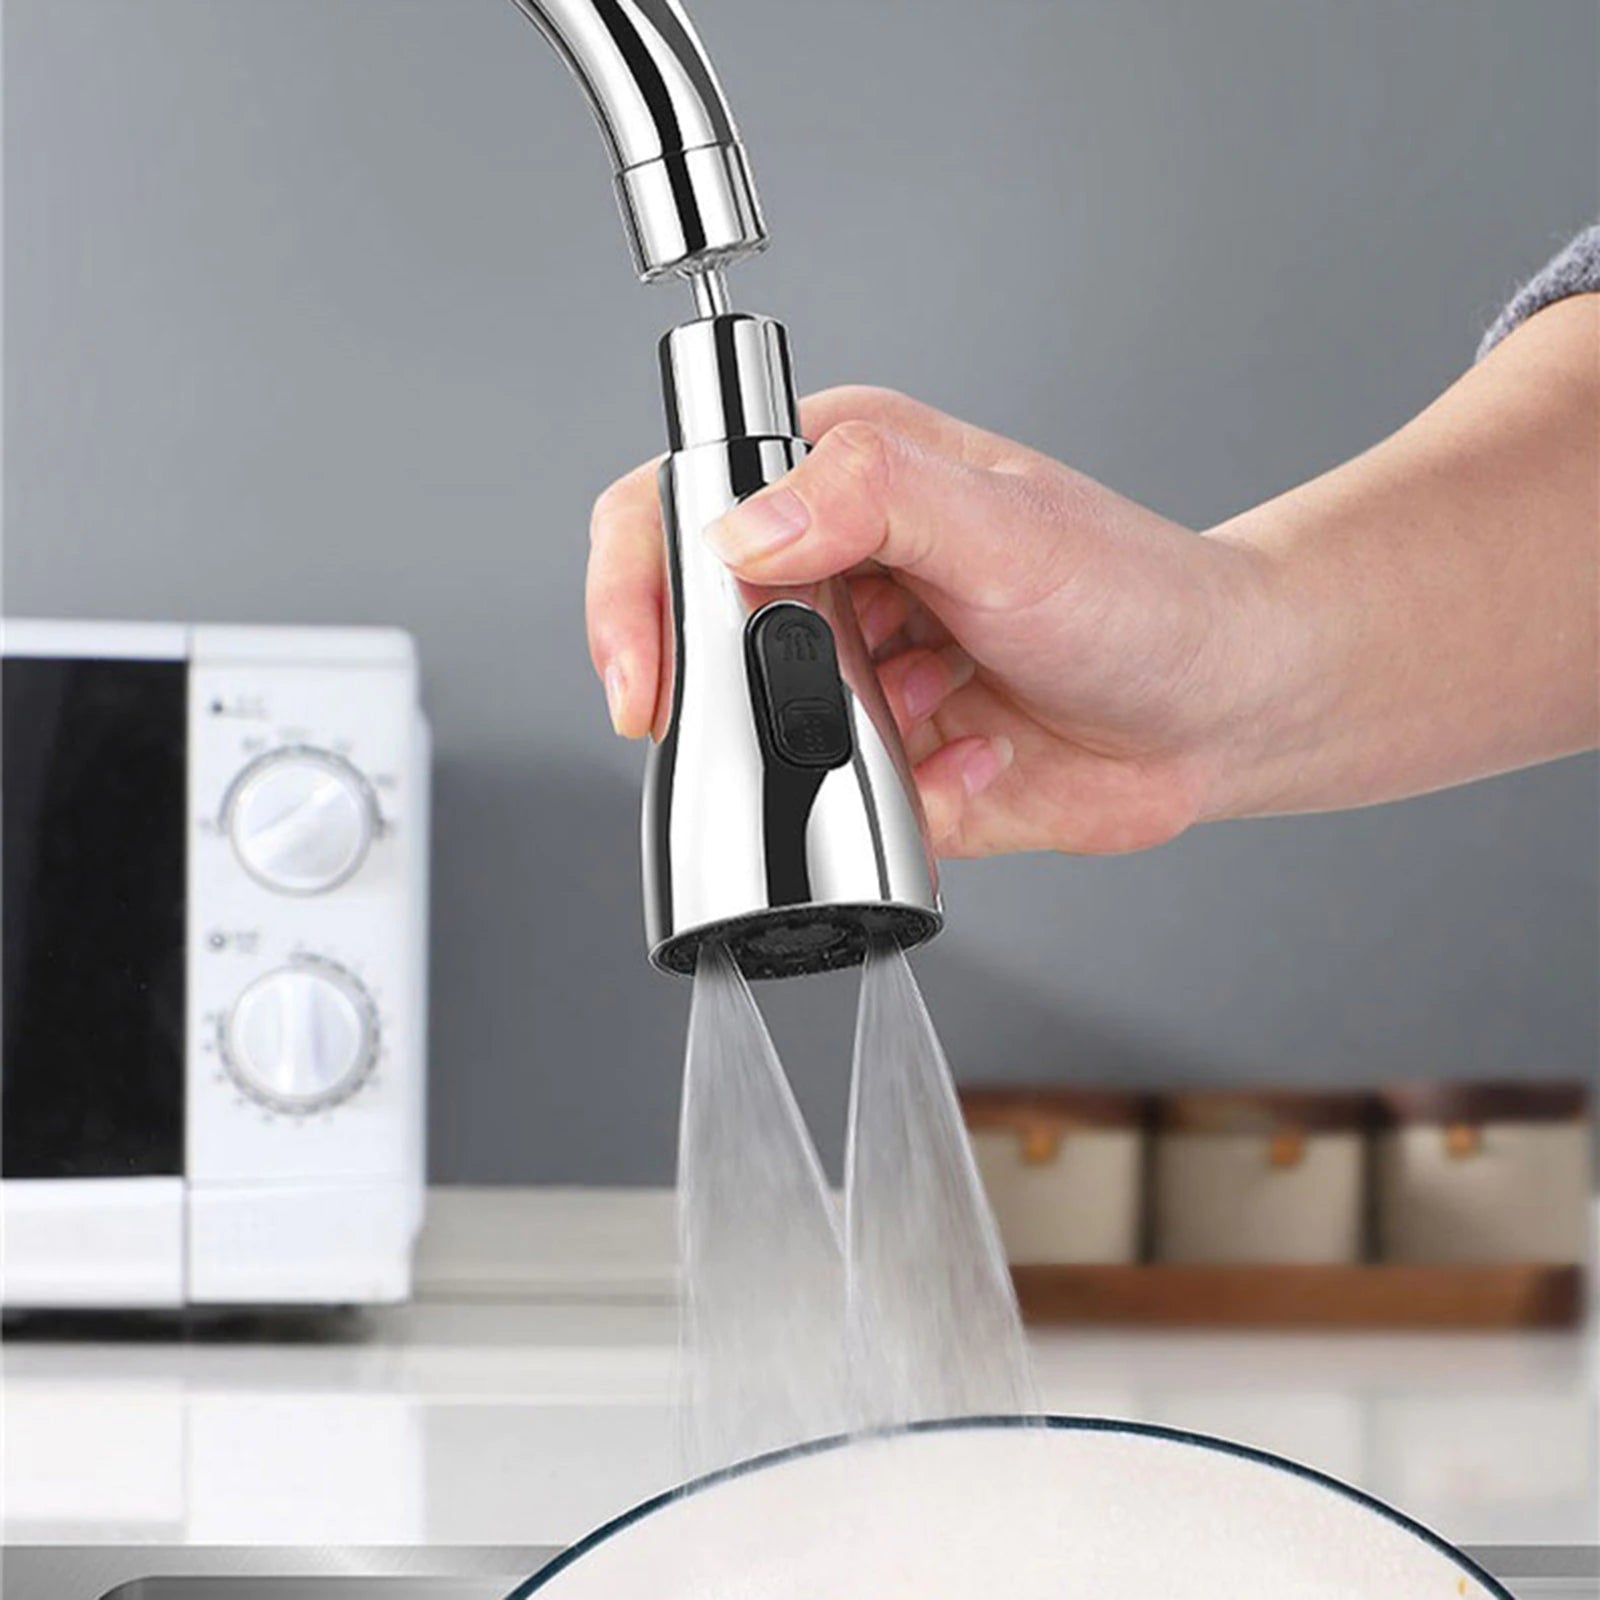 InArt Sink Faucet Sprayer Attachment - Movable Kitchen Tap Head with Hose, 360° Rotatable Anti-Splash Faucet Nozzle Head - InArt-Studio-USA